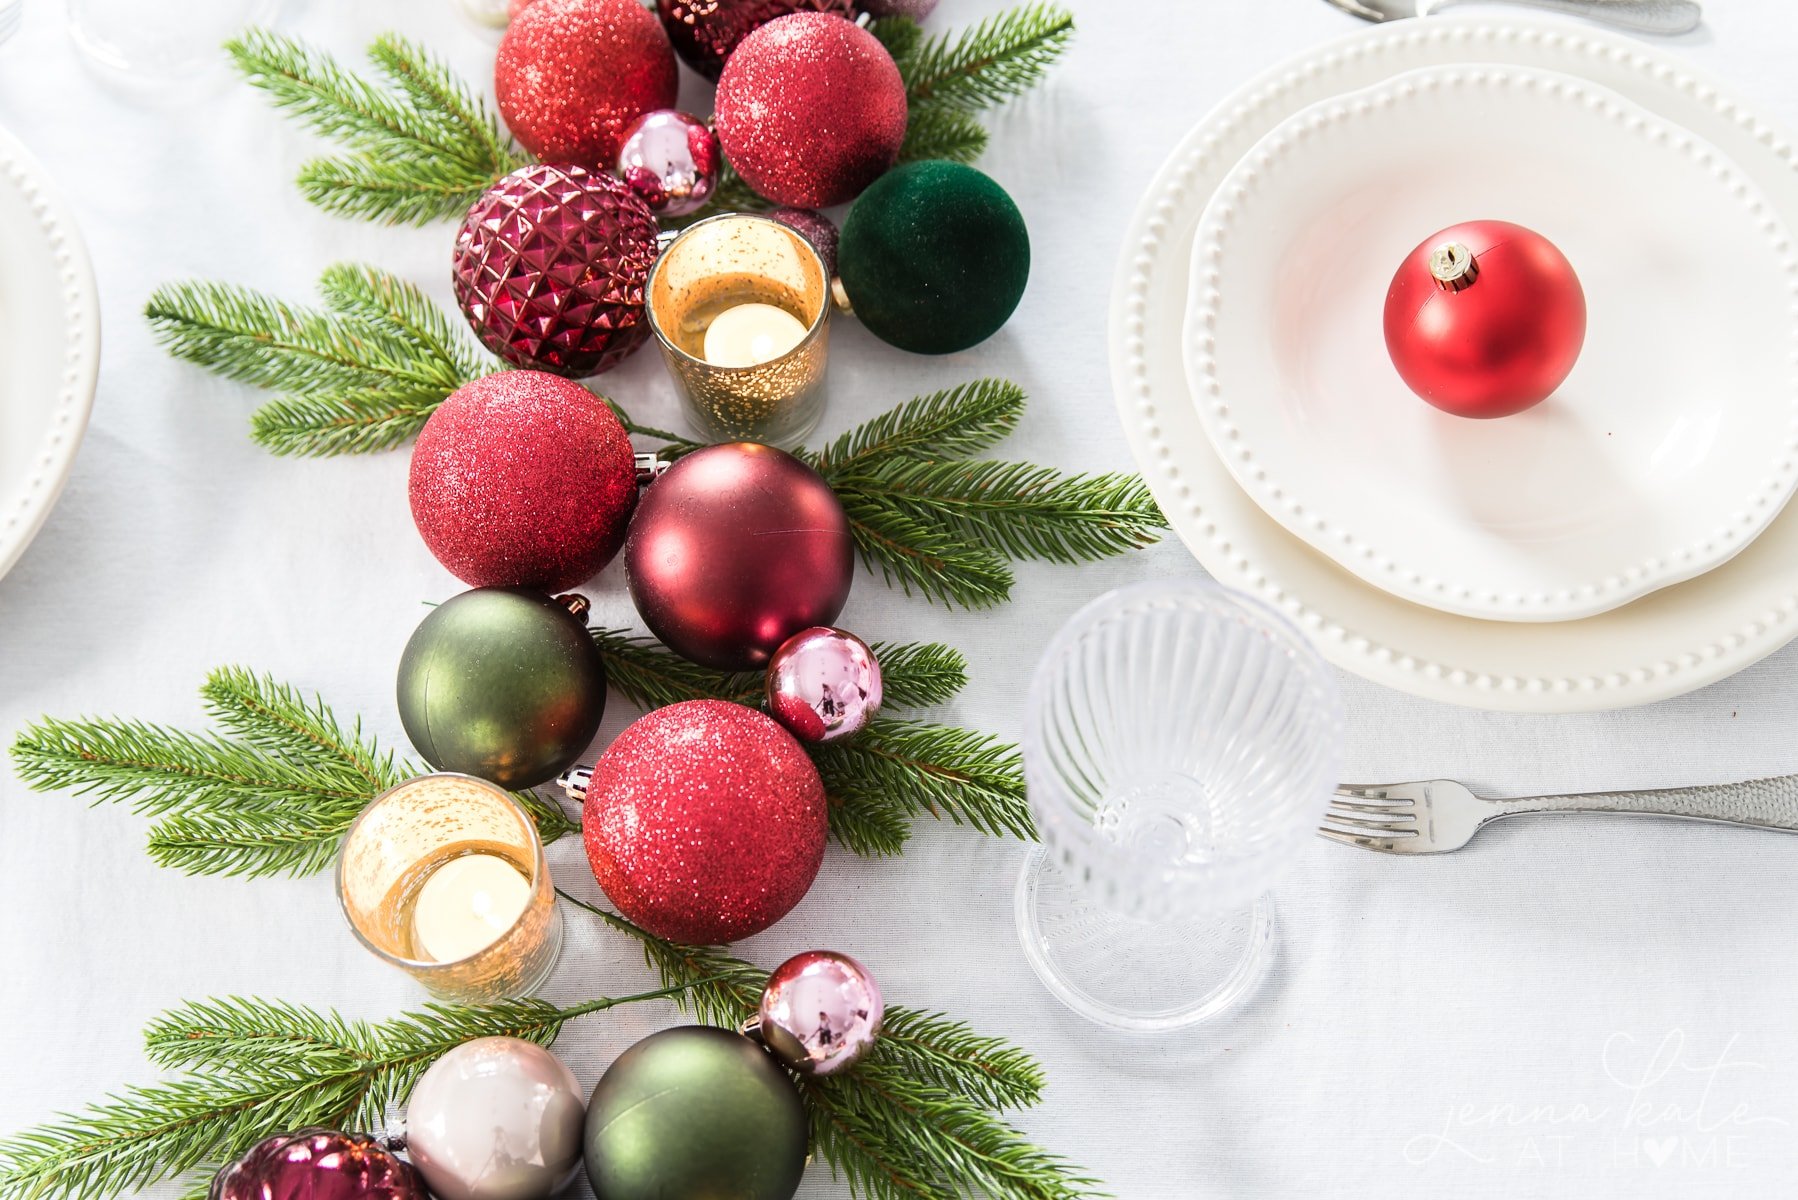 Festive Christmas table centerpiece using tree ornaments, votives and greenery